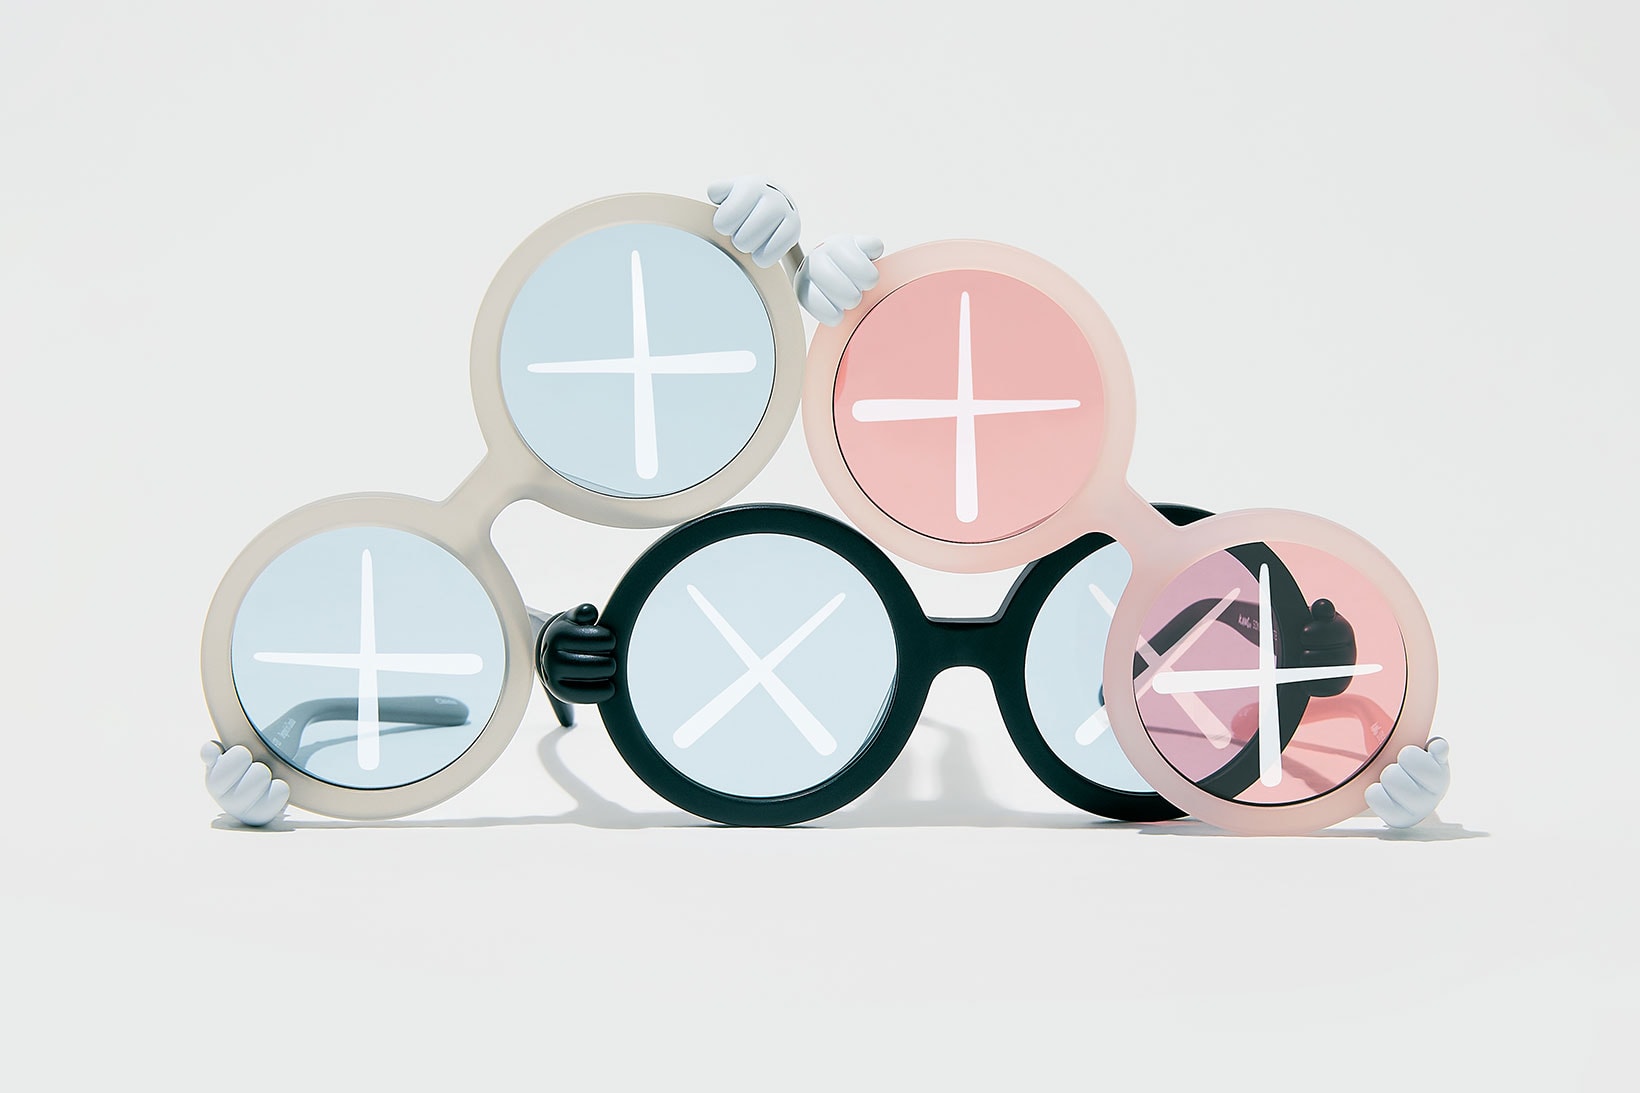 kaws sons and daughters sunglasses companion kids woaw gallery store hong kong exhibition